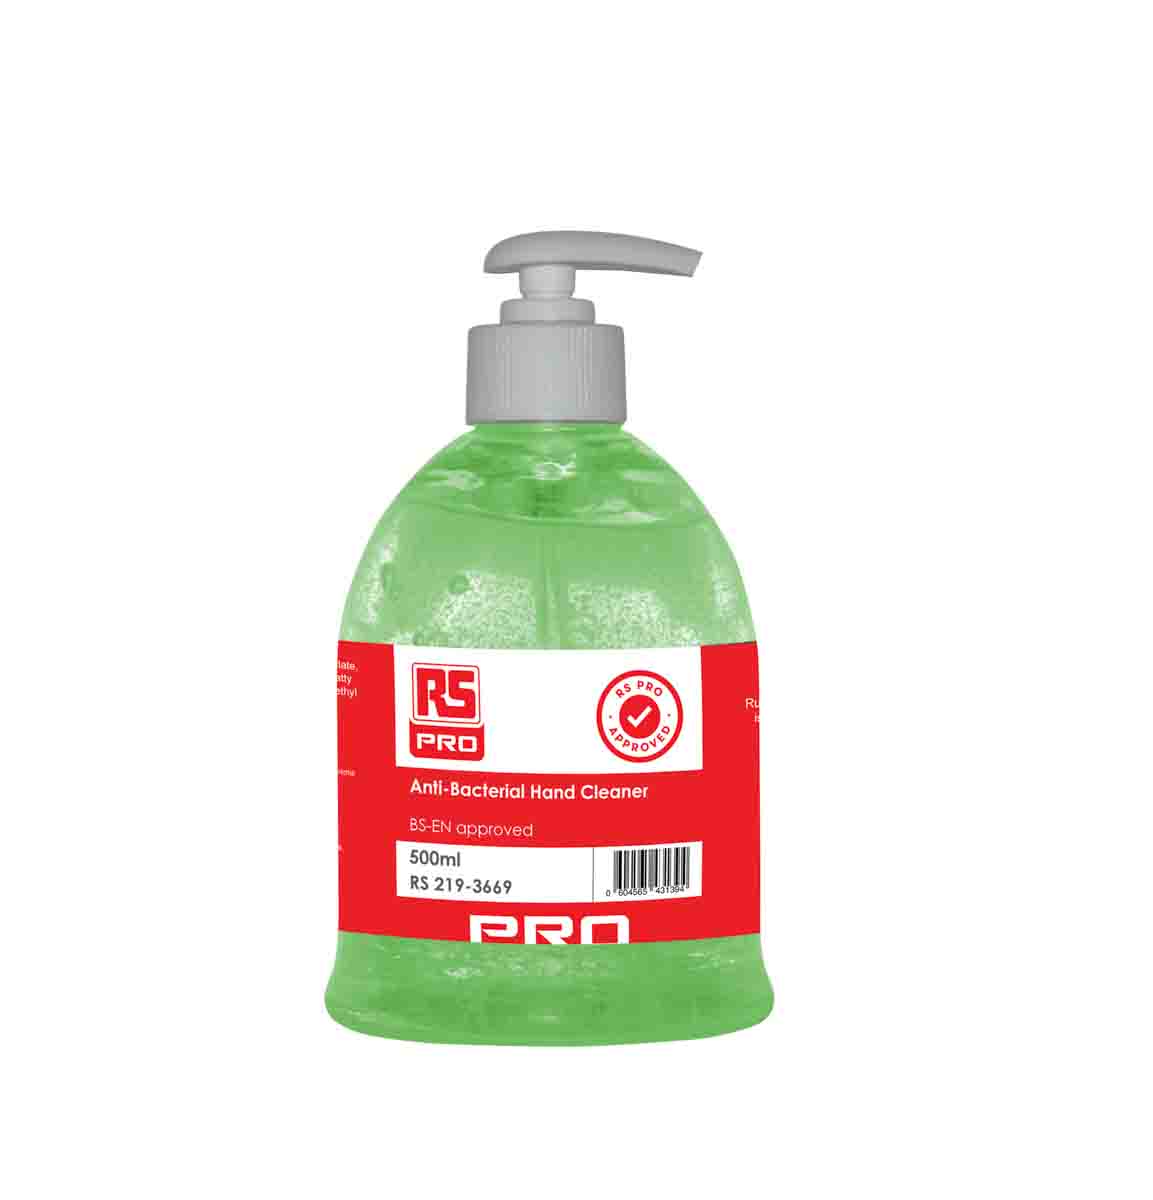 RS PRO Foaming Hand Cleanerwith Anti-Bacterial Properties with No Petroleum or Natural Solvents - 500 ml Bottle